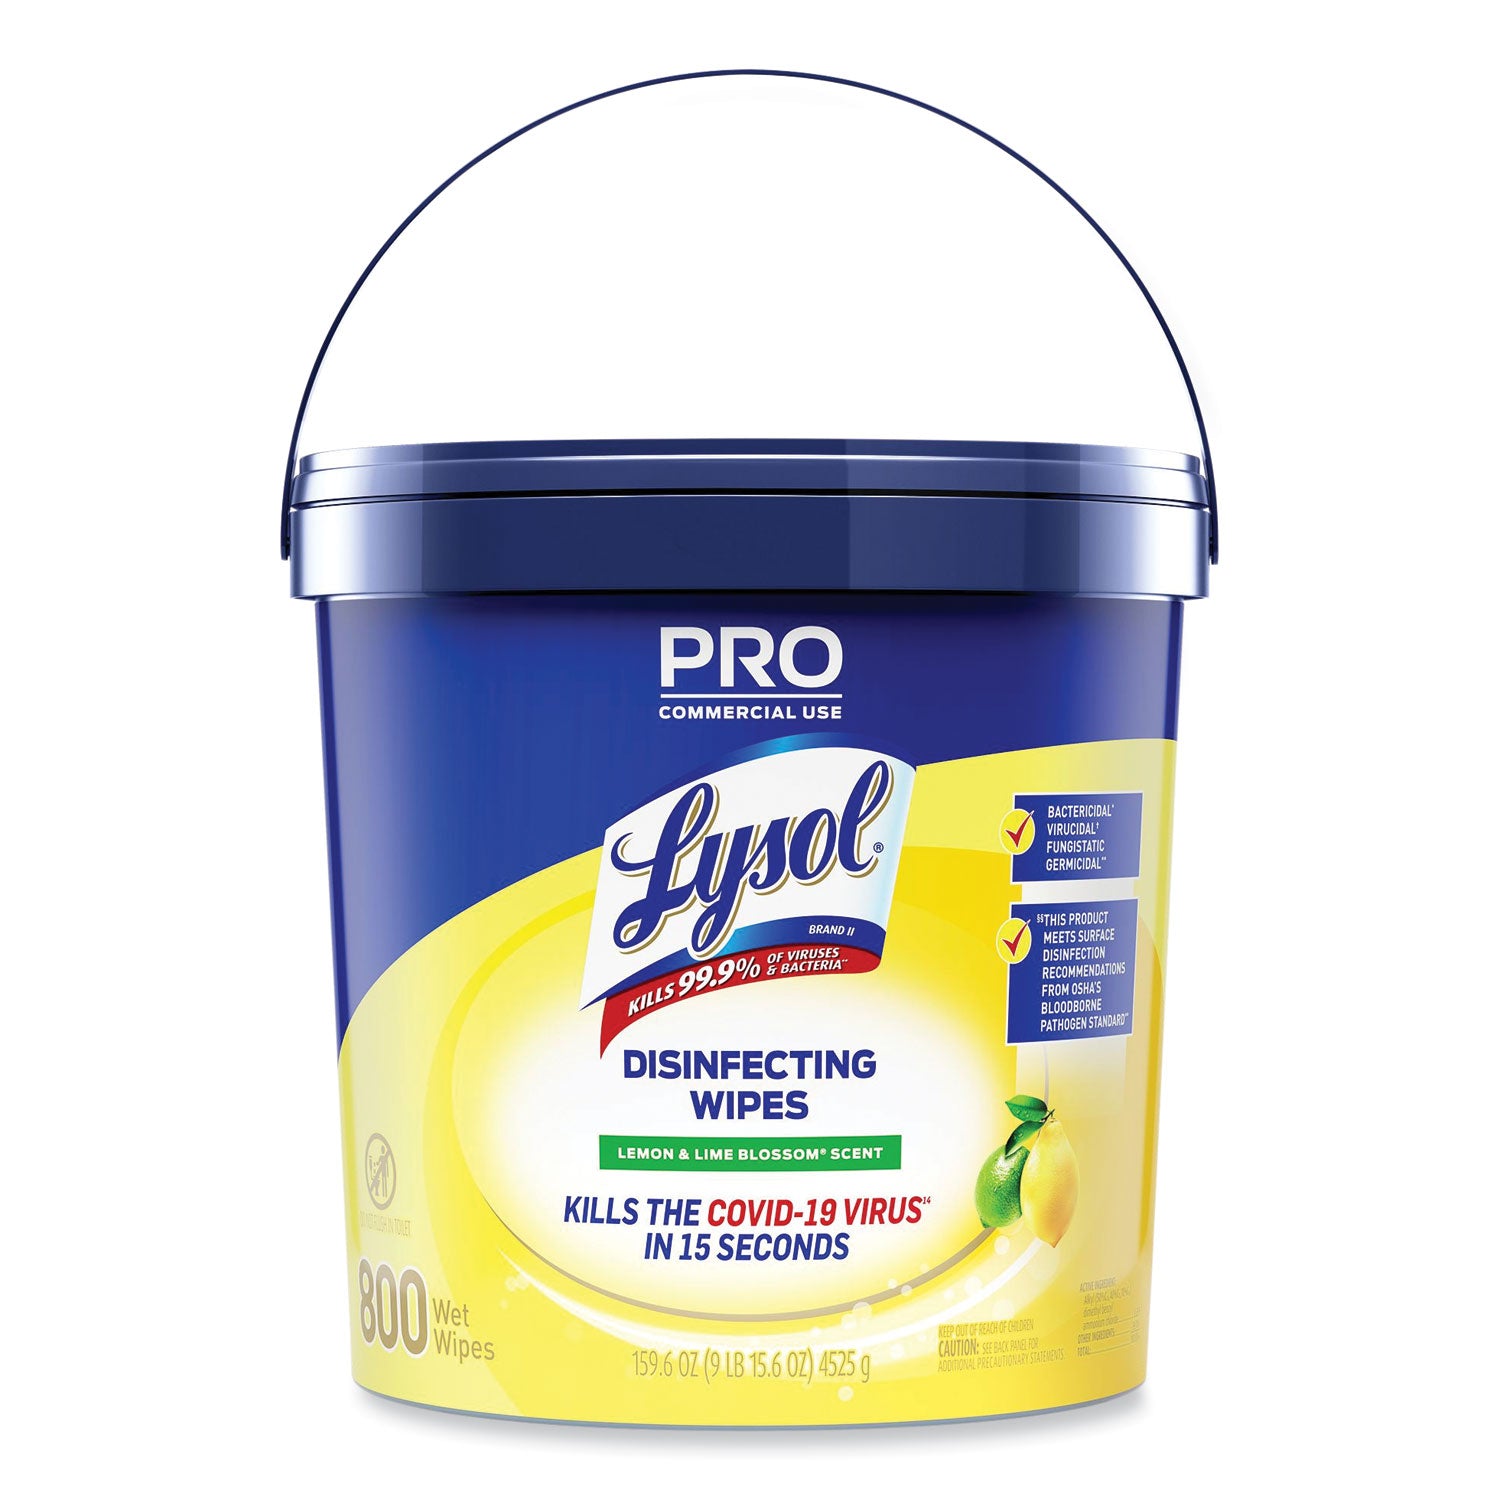 professional-disinfecting-wipe-bucket-1-ply-6-x-8-lemon-and-lime-blossom-white-800-wipes-bucket-2-buckets-carton_rac99856ct - 1